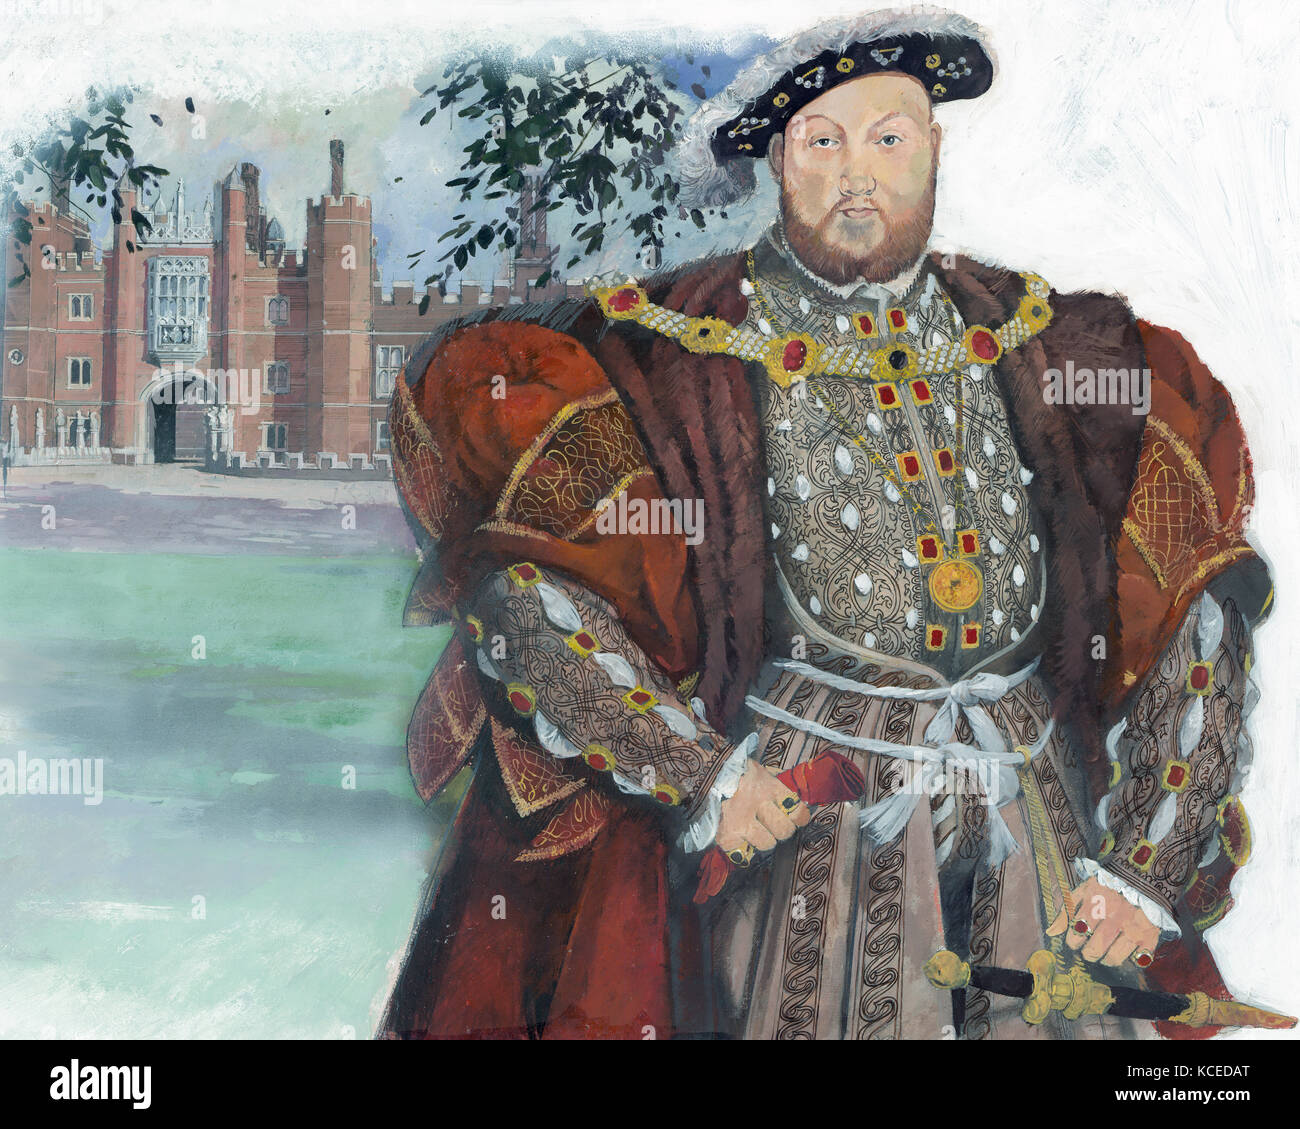 Illustration by Ivan Lapper depicting King Henry VIII of England, based on the portrait of Henry by Hans Holbein the Younger. In the background is the Stock Photo